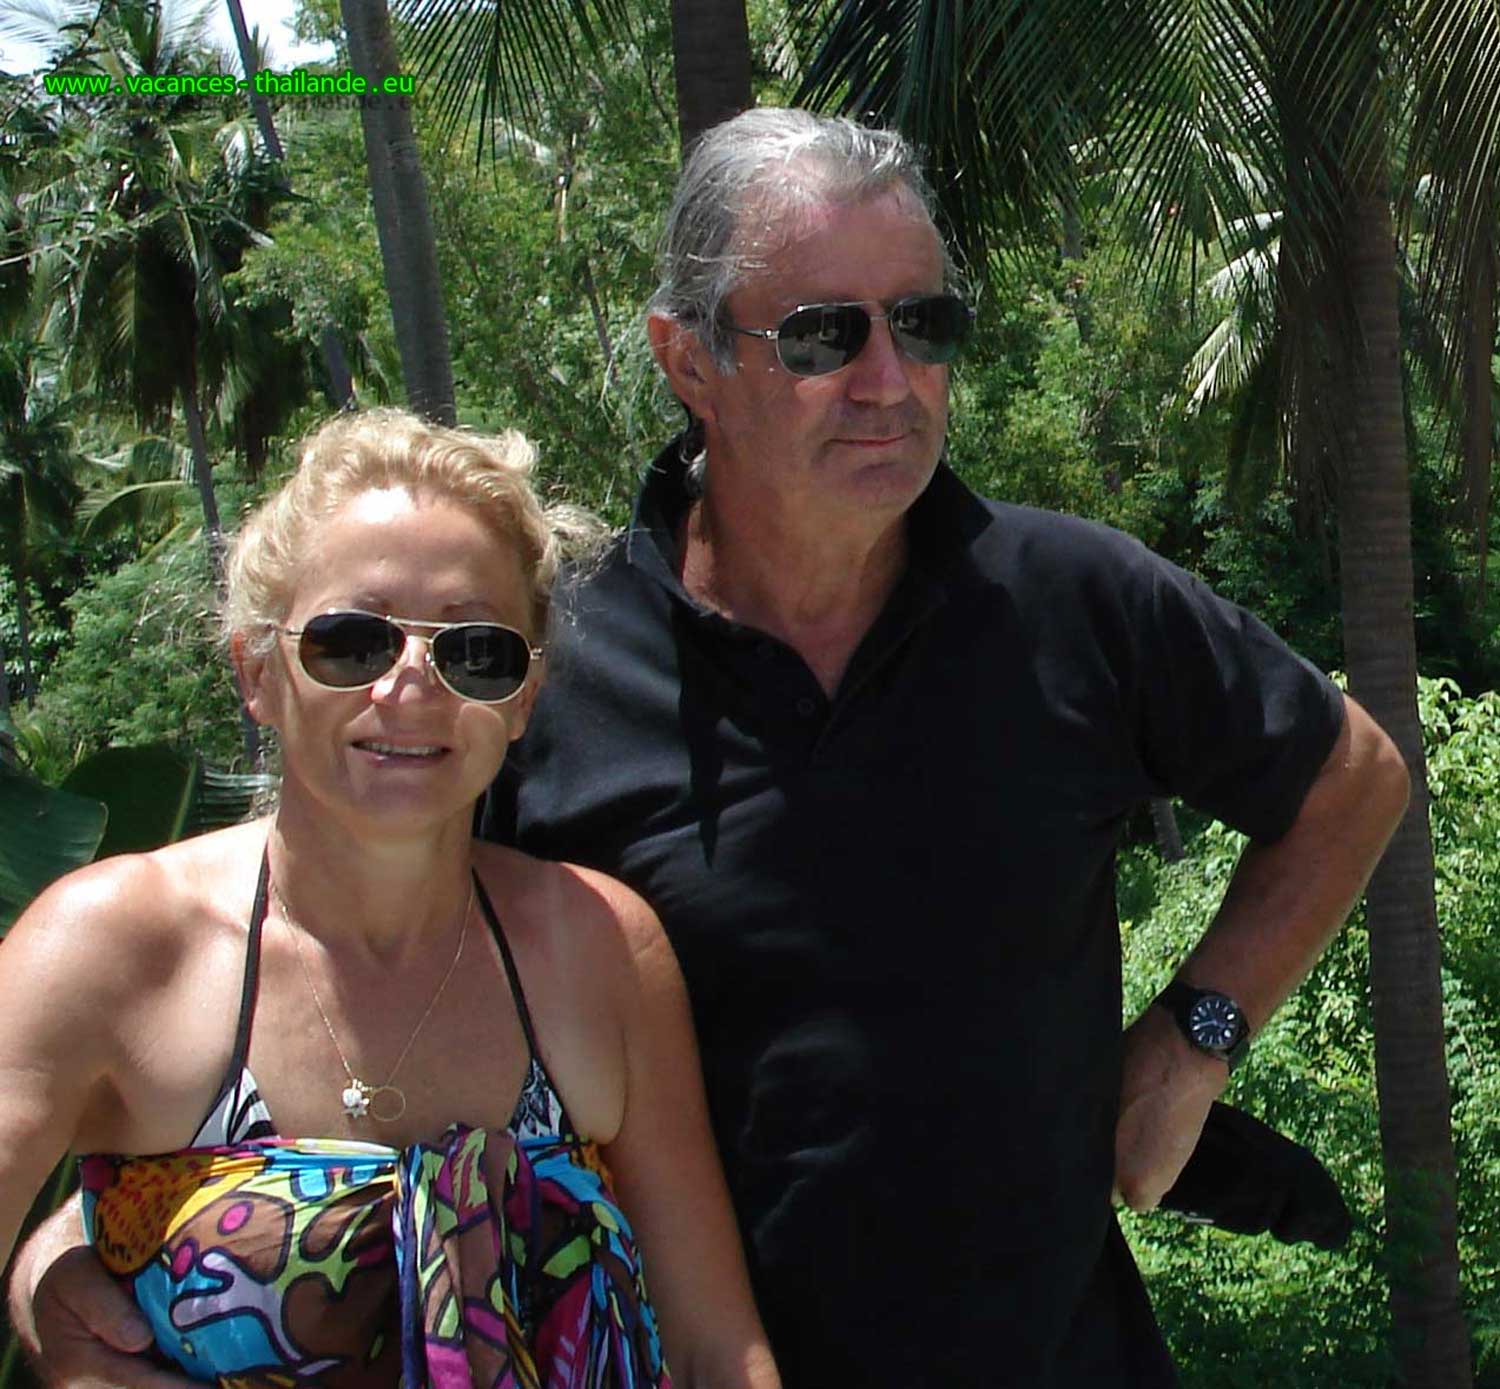 english photo 51, Paris pool villa rental by Marie and Patrick welcome you to Koh Samui Island